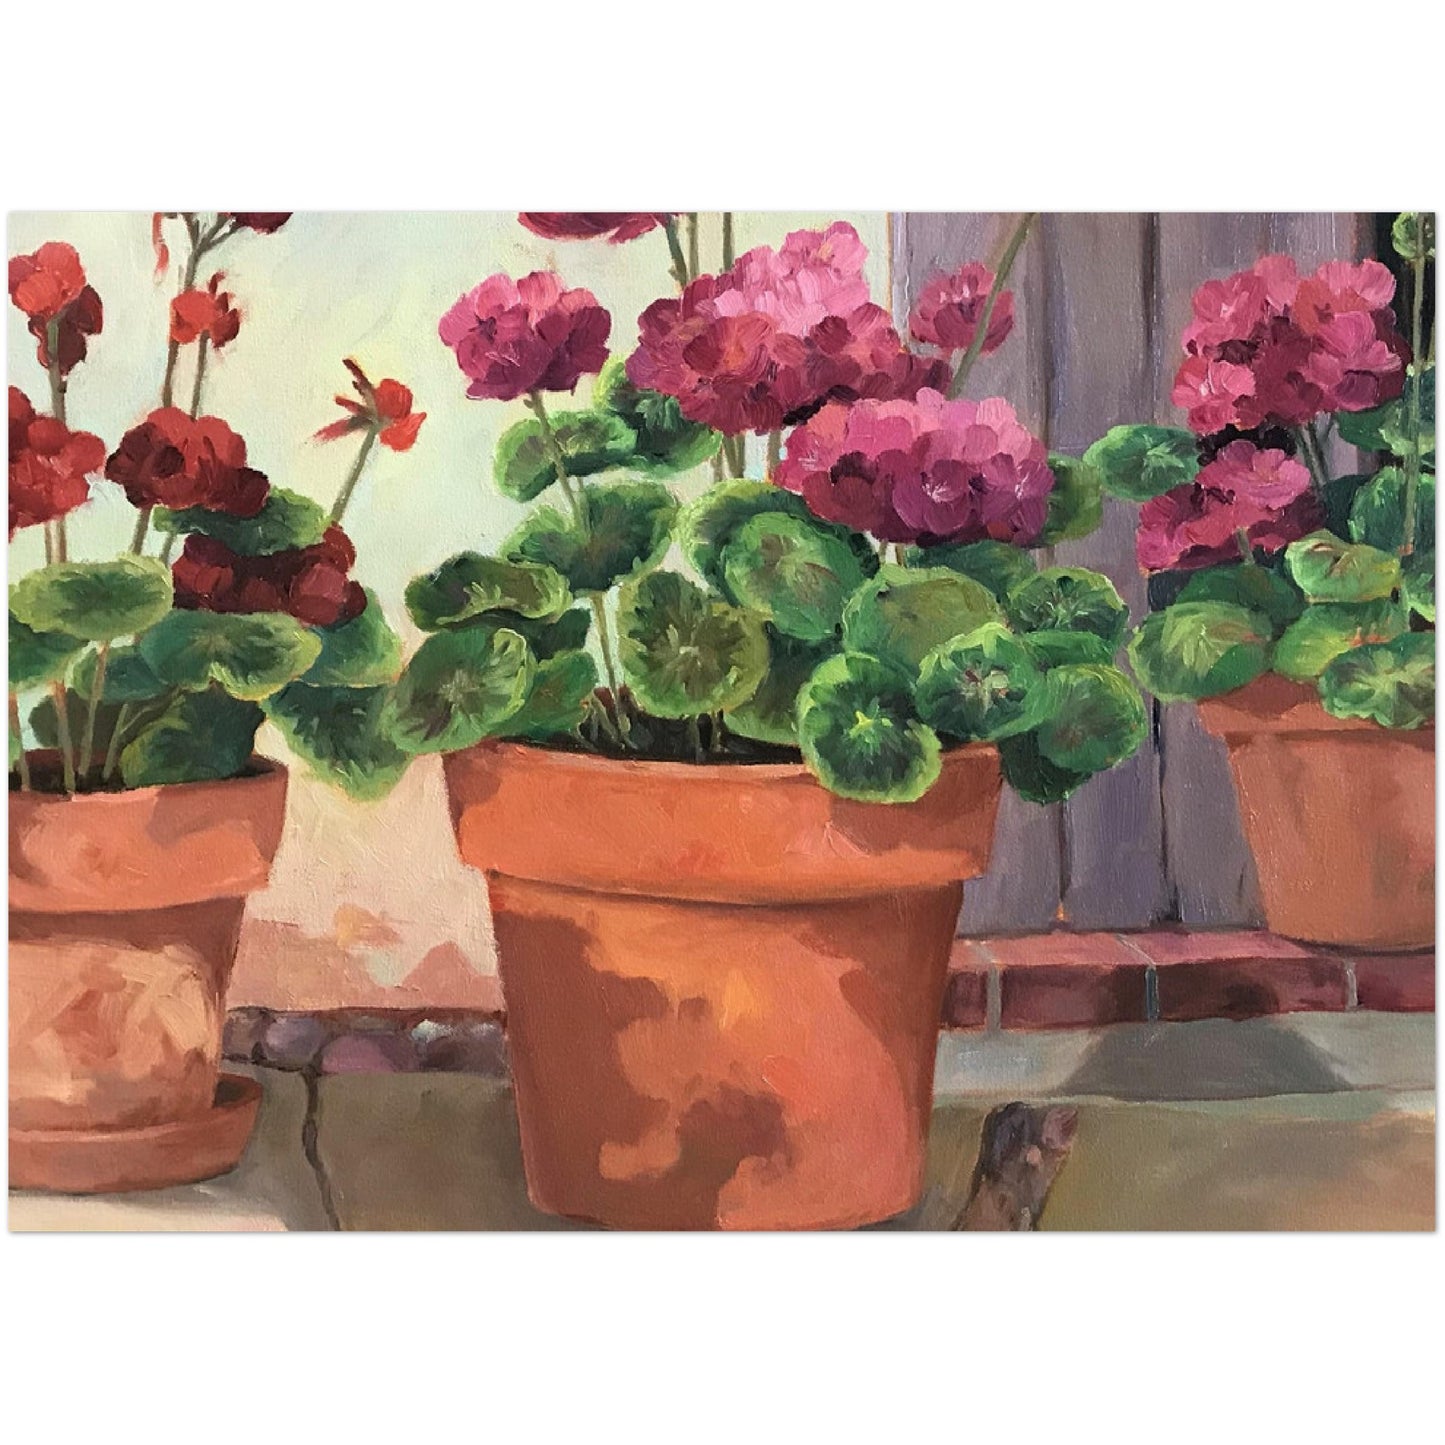 Pack of 10 postcards "Geraniums 2" (2-sided, No envelopes, US & CA) by Barbara Cleary Designs